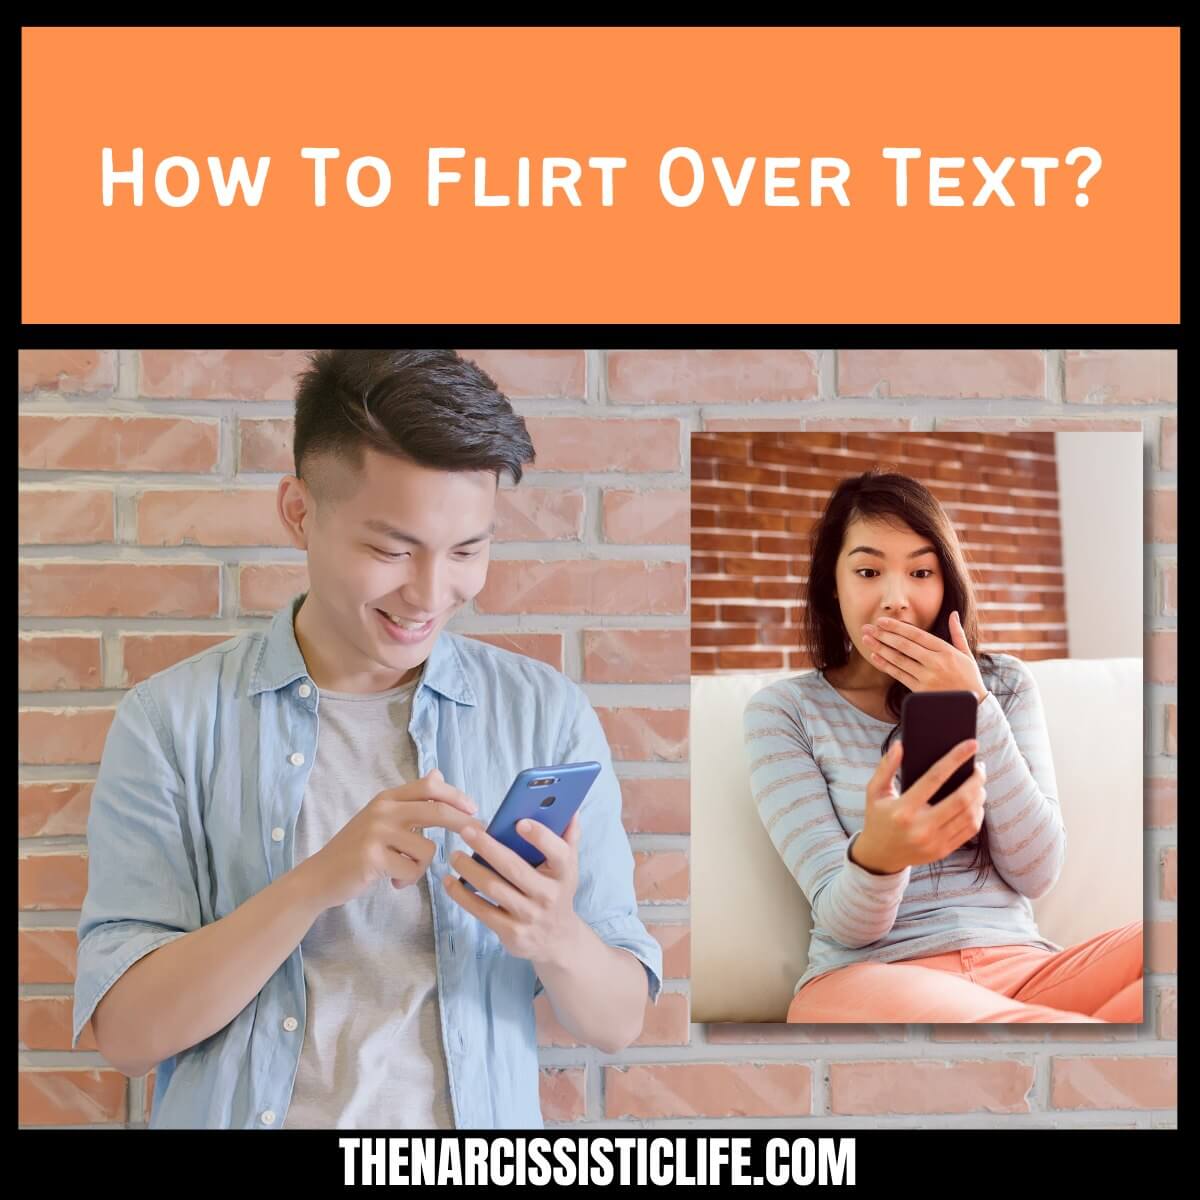 How To Flirt Over Text?